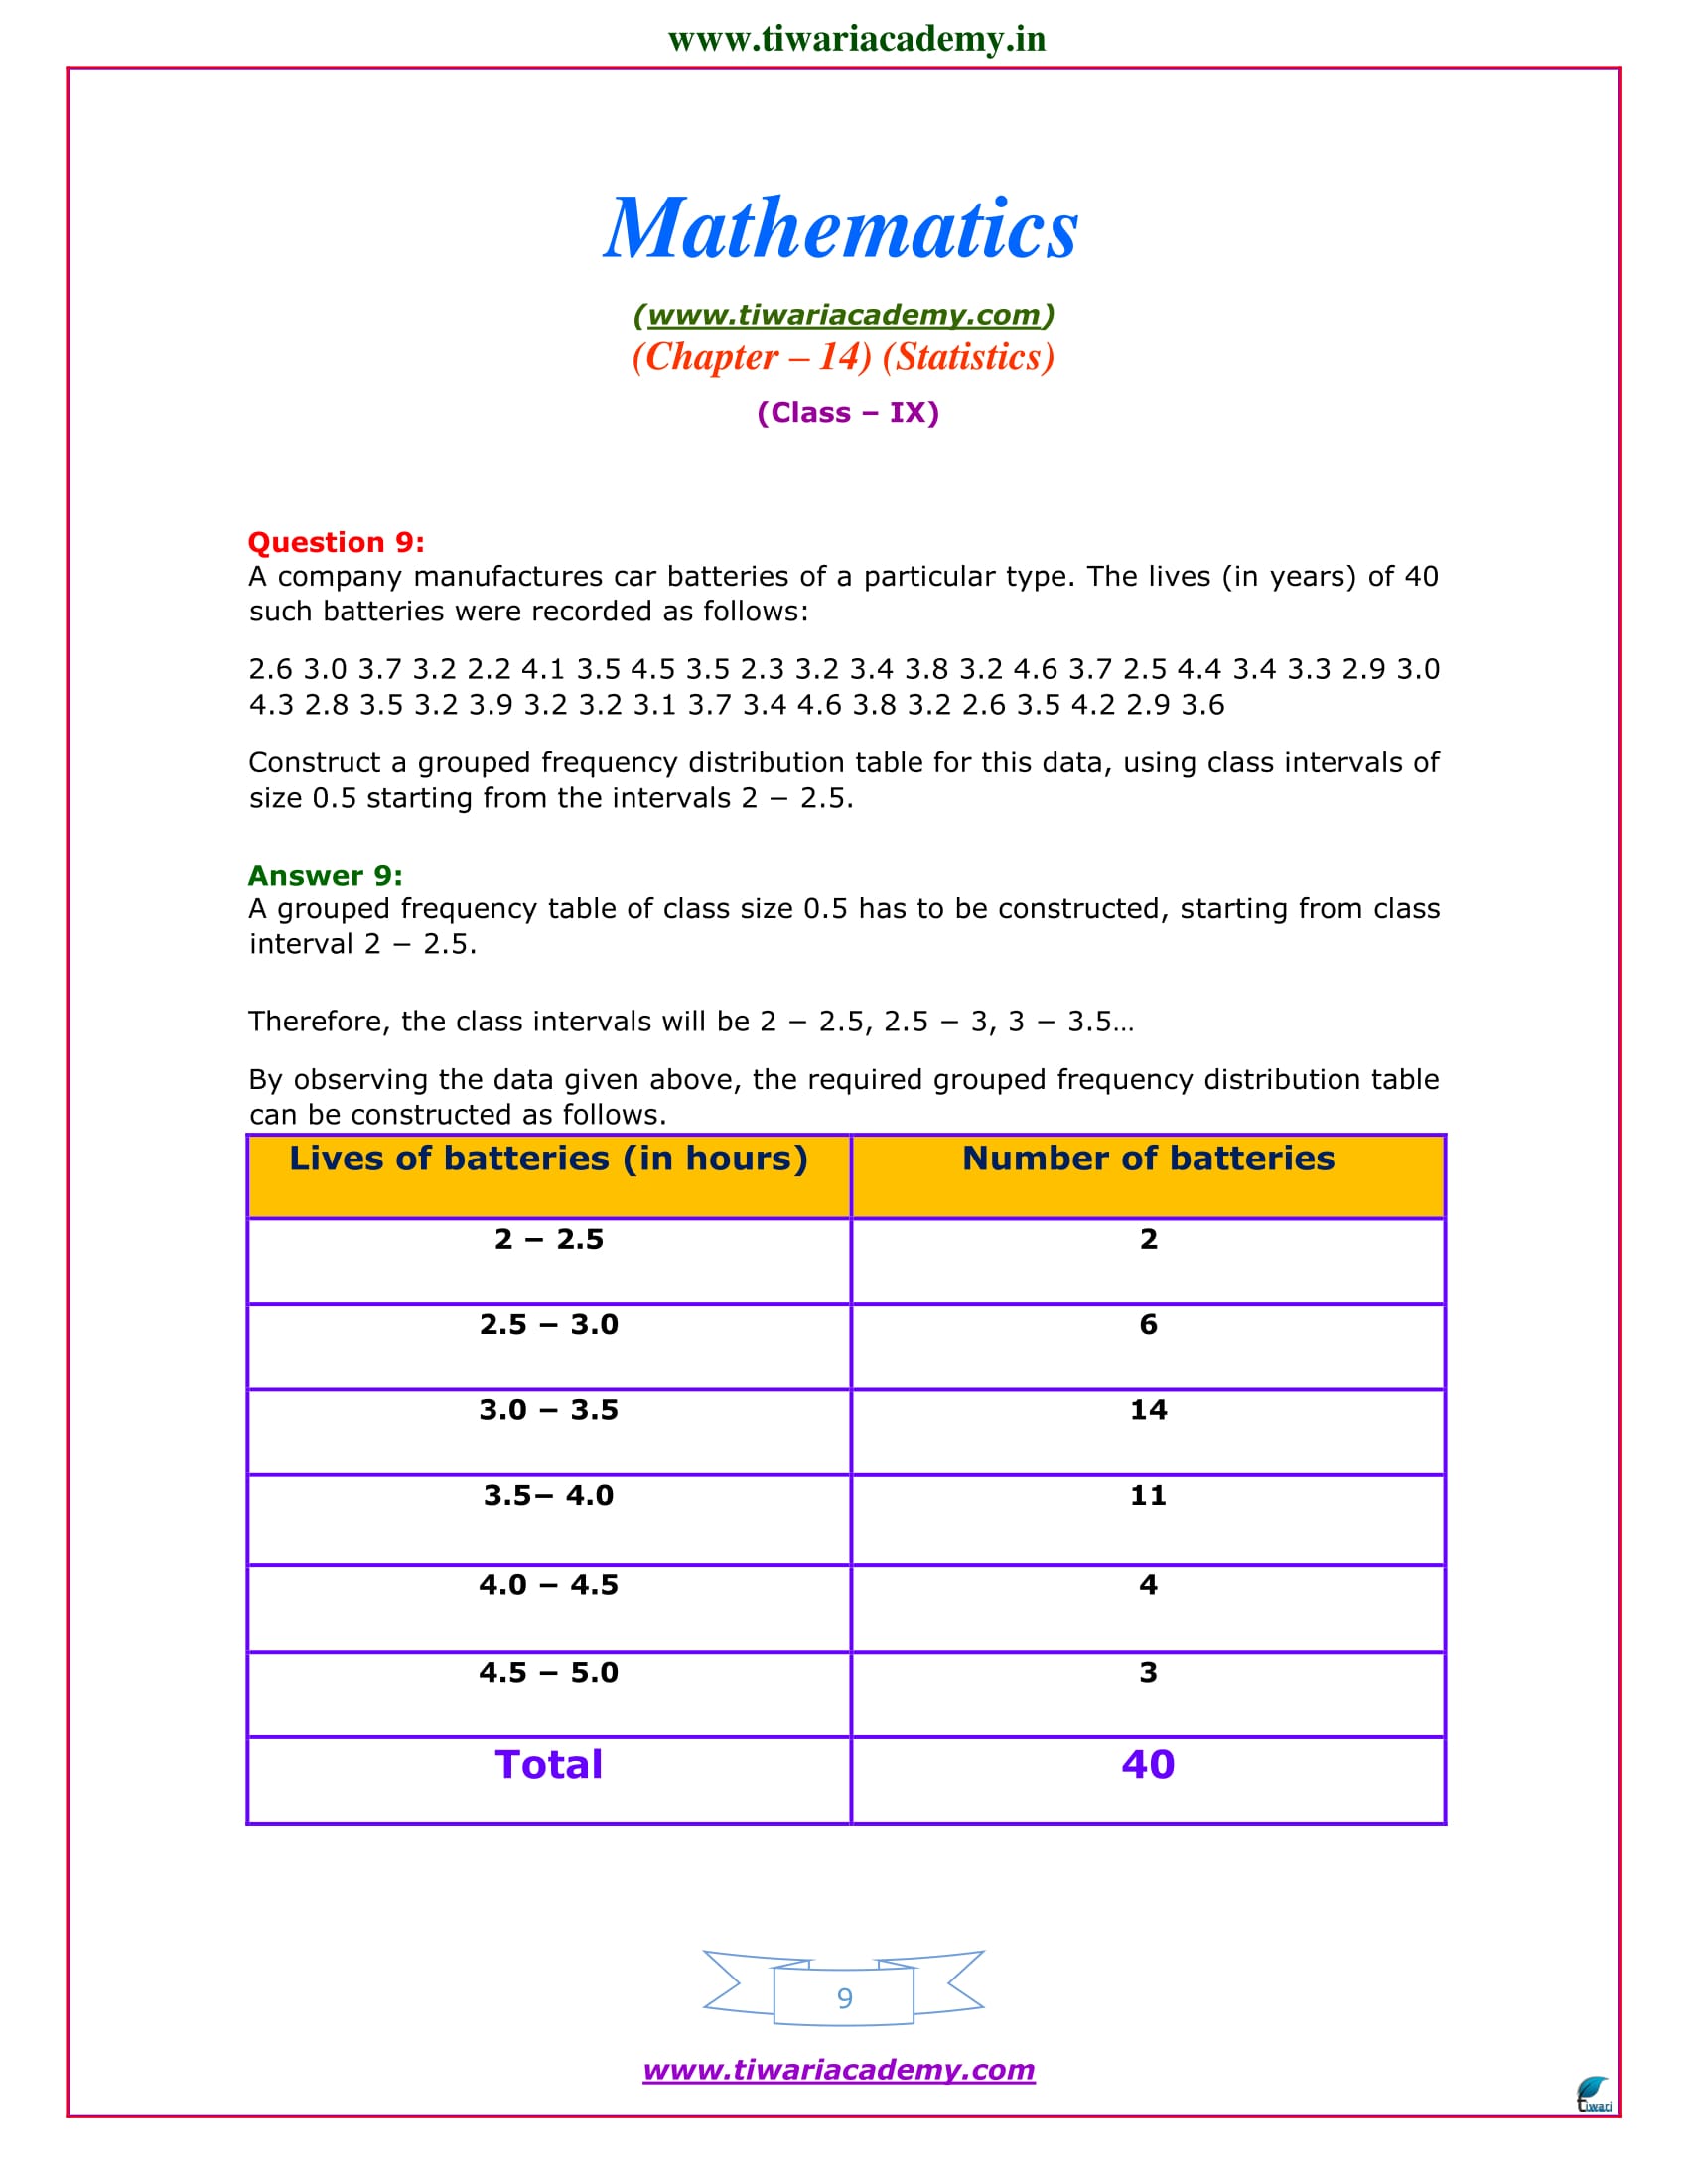 exercise 14.2 solution class 9 maths